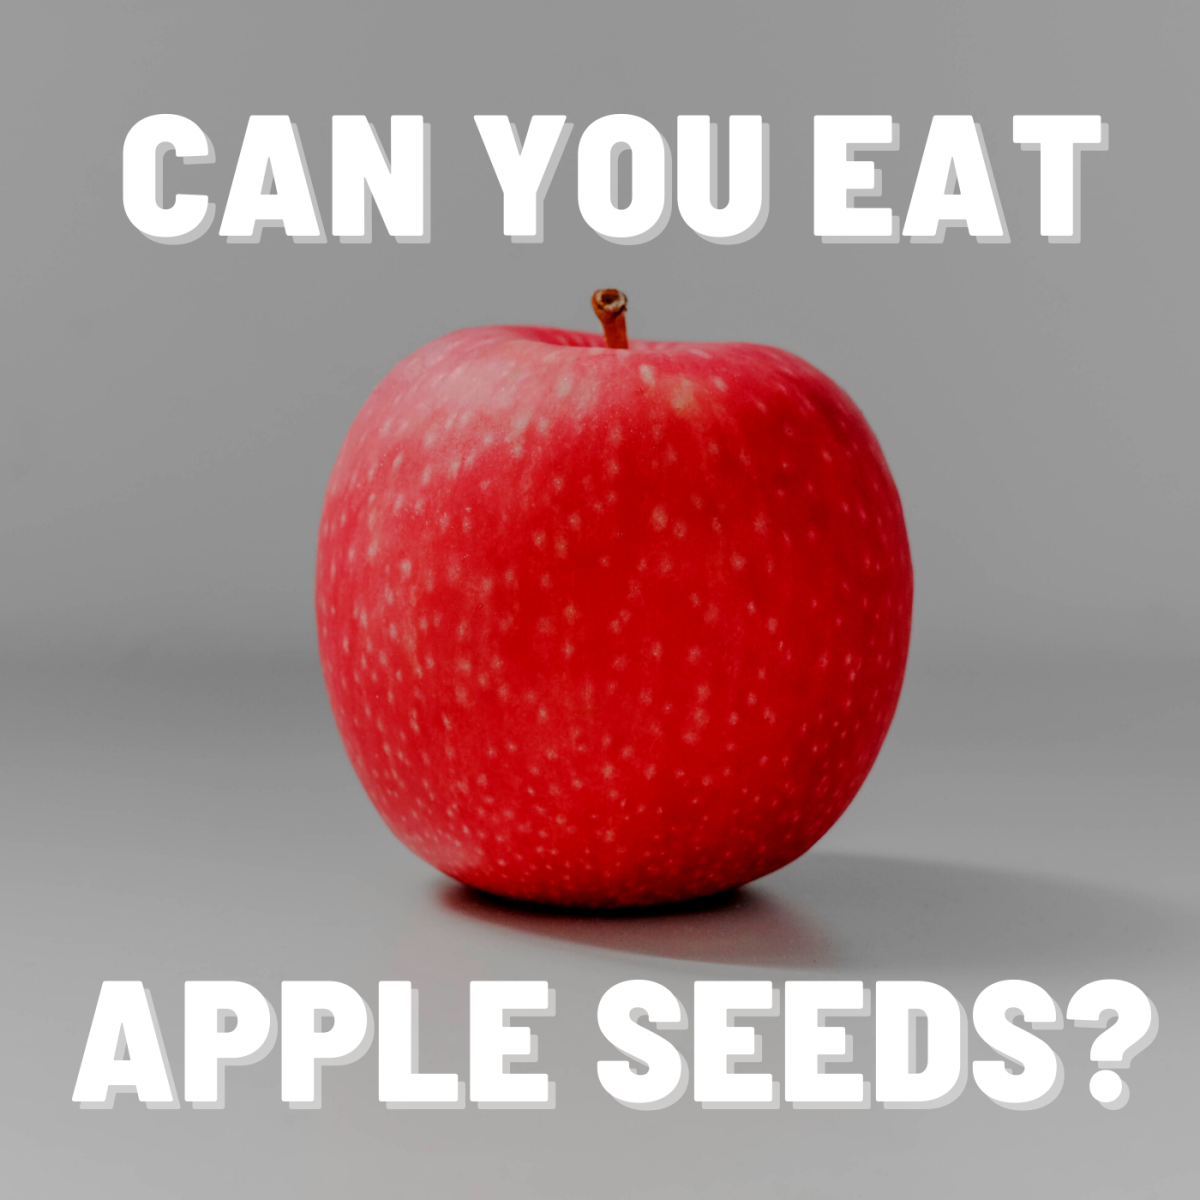 Apple Seeds Have Poisonous Cyanide